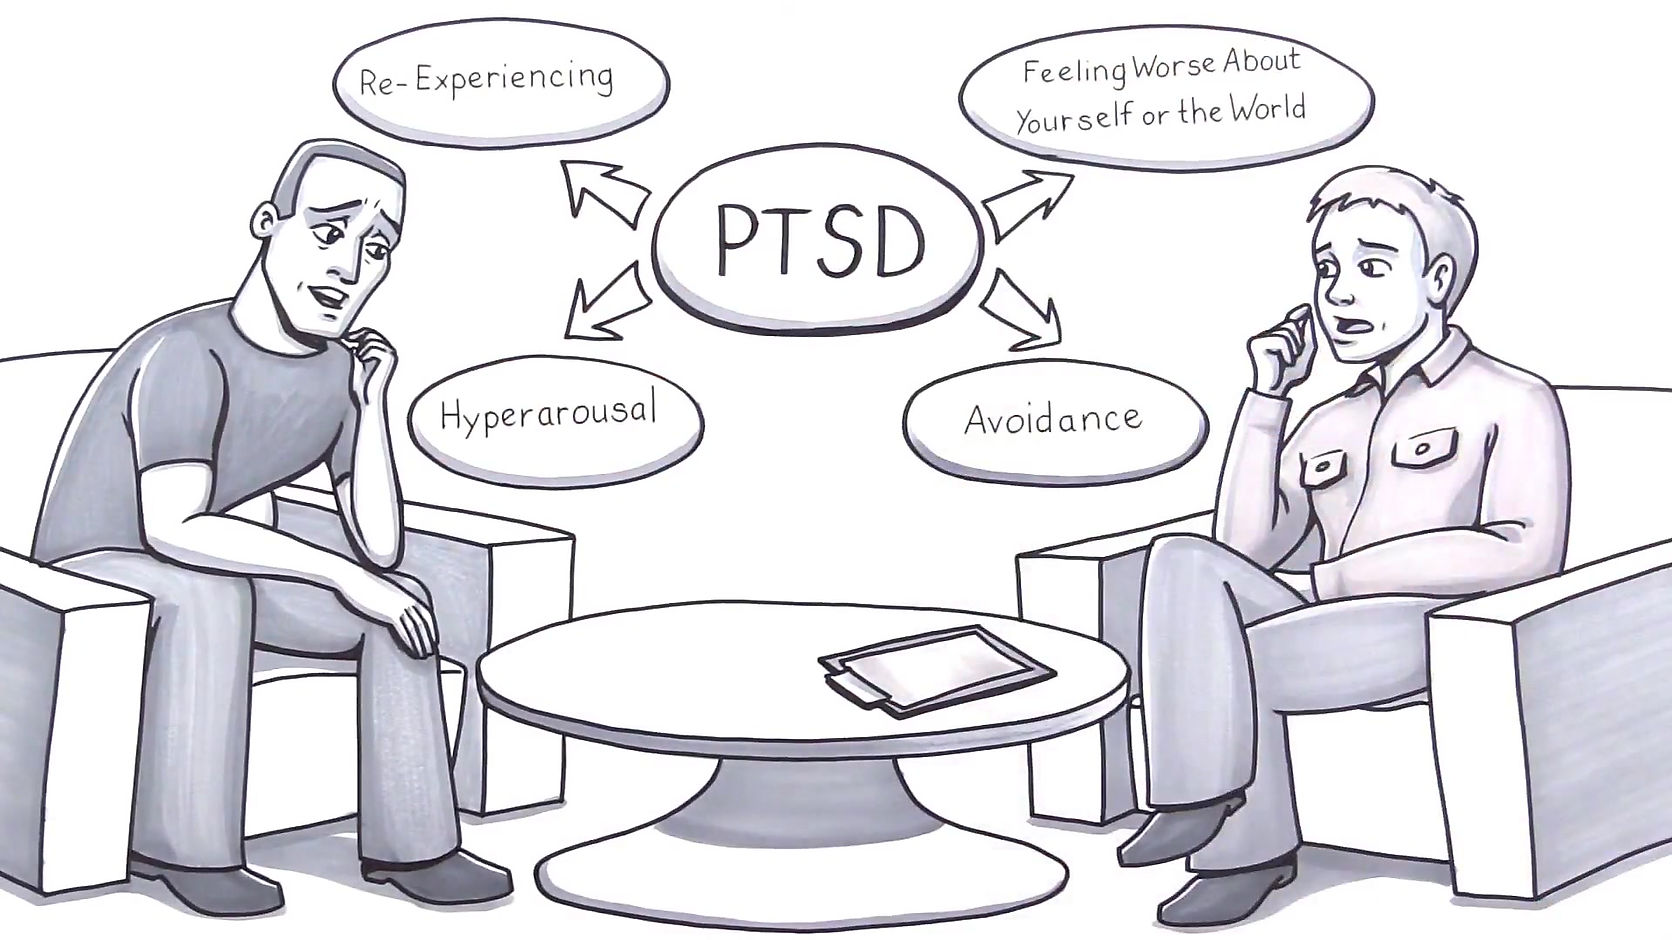 What is PTSD?